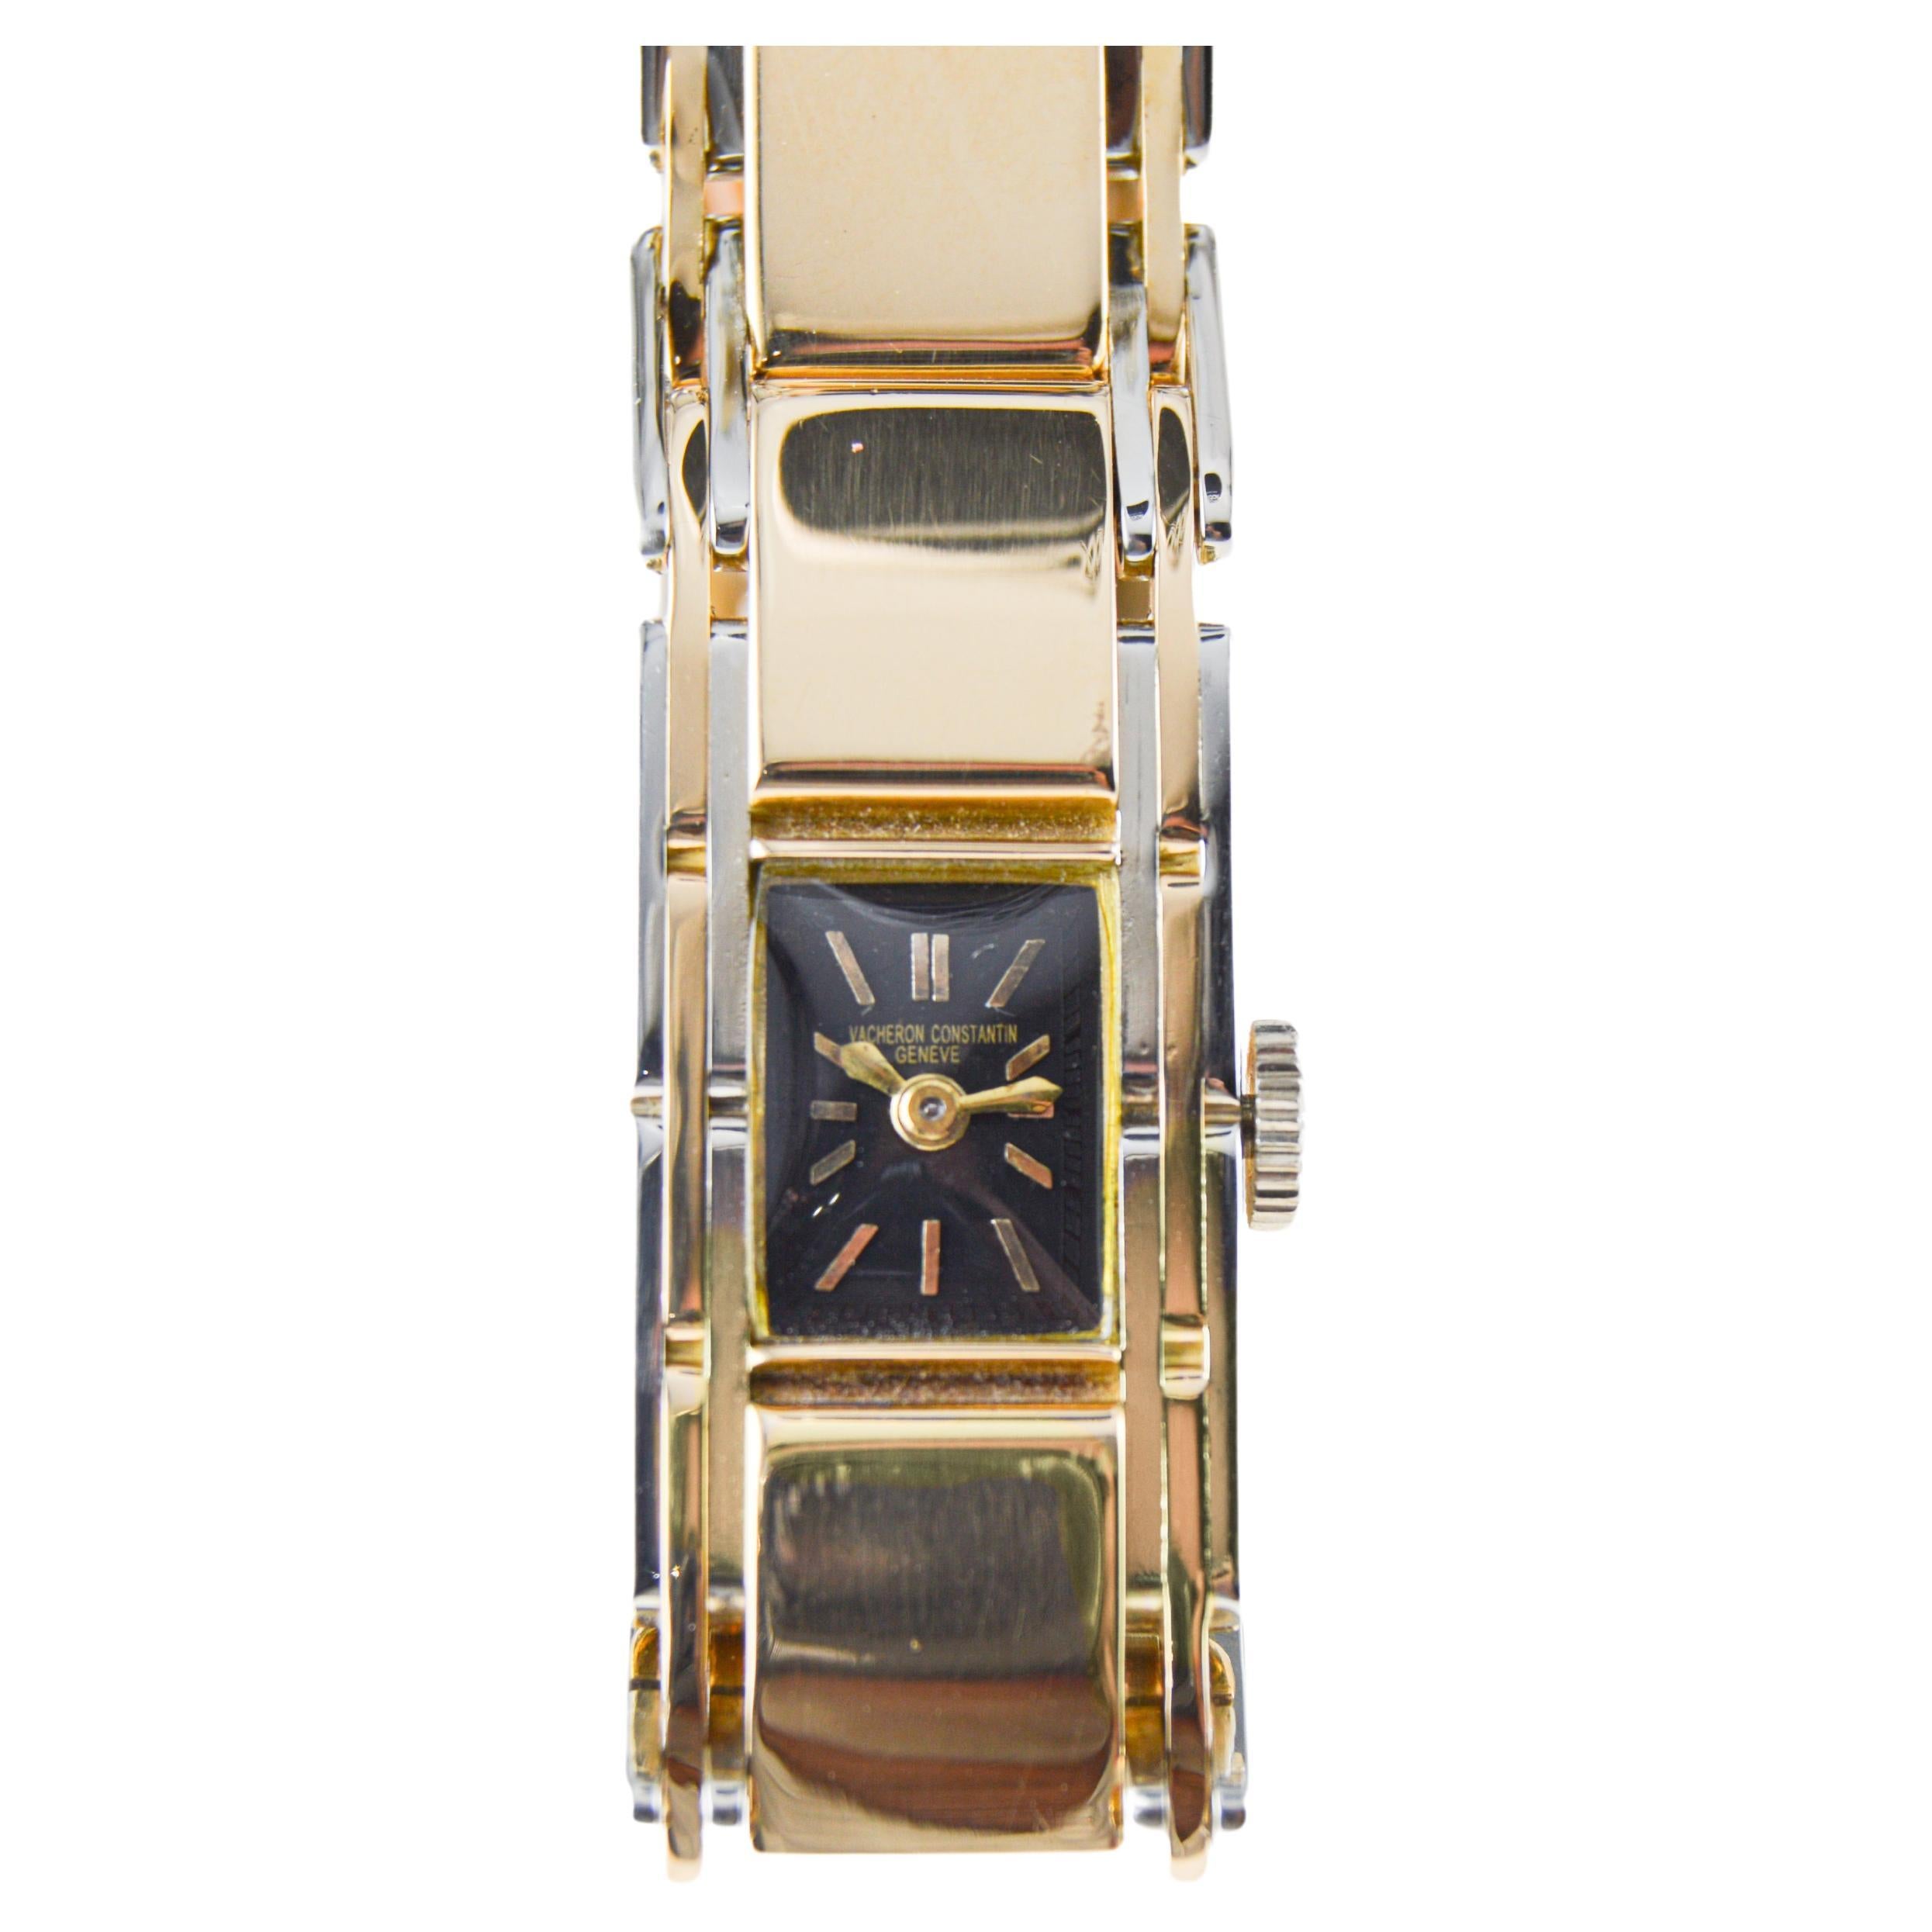 FACTORY / HOUSE: Vacheron Constantin
STYLE / REFERENCE: Art Deco / Double Deployant Dress Watch
METAL / MATERIAL: 18Kt Two Tone Gold / Yellow & White
CIRCA / YEAR: 1920's
DIMENSIONS / SIZE: Length 28mm X Width 16mm
MOVEMENT / CALIBER: Manual Winding